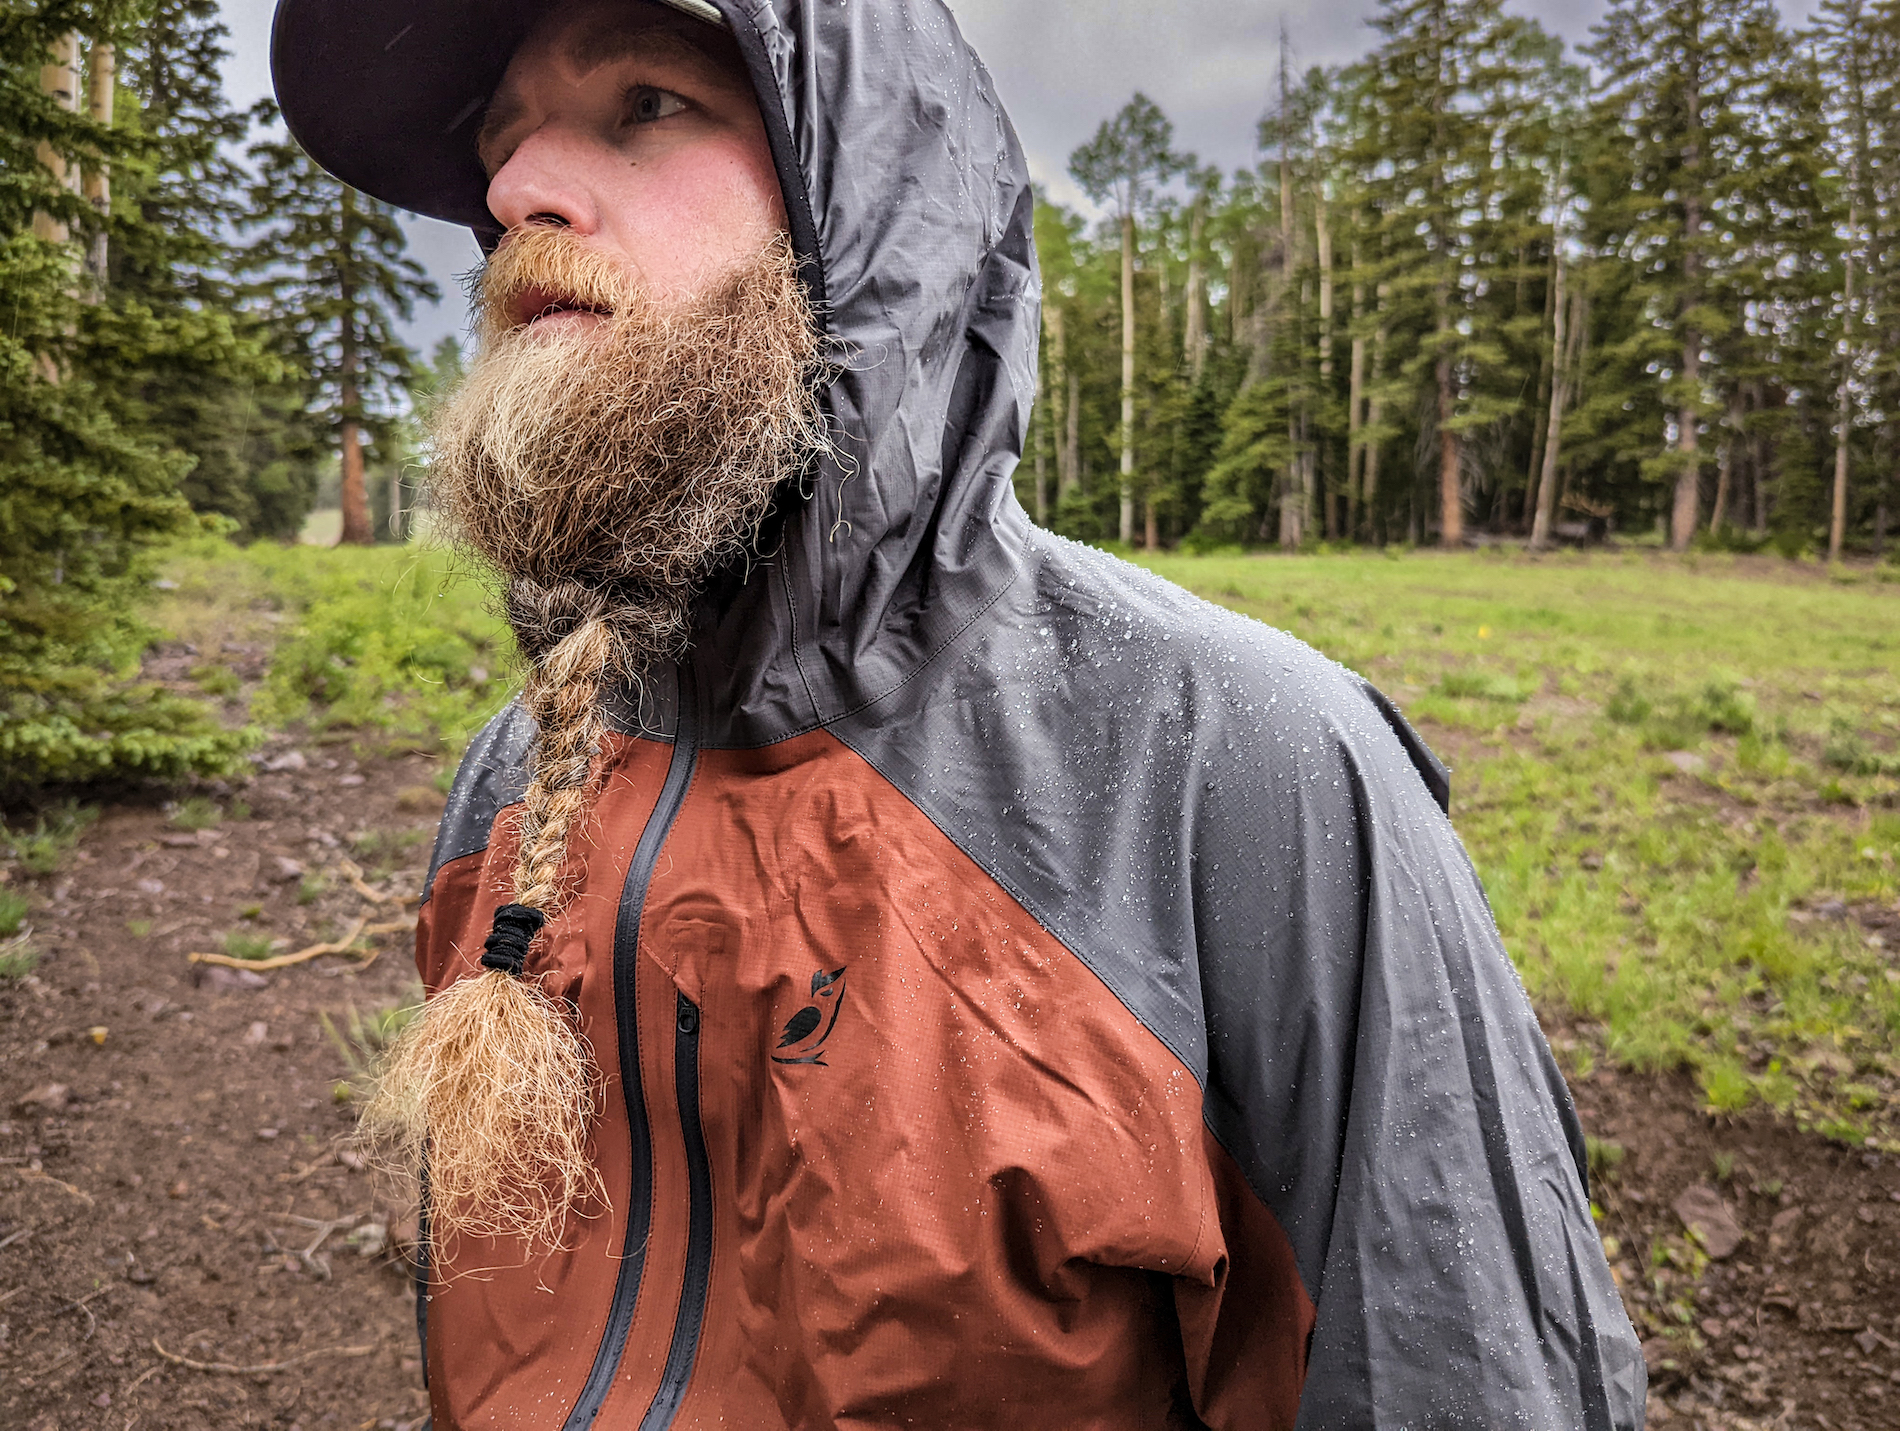 Outdoor Vitals Redefines Ultralight with New Releases